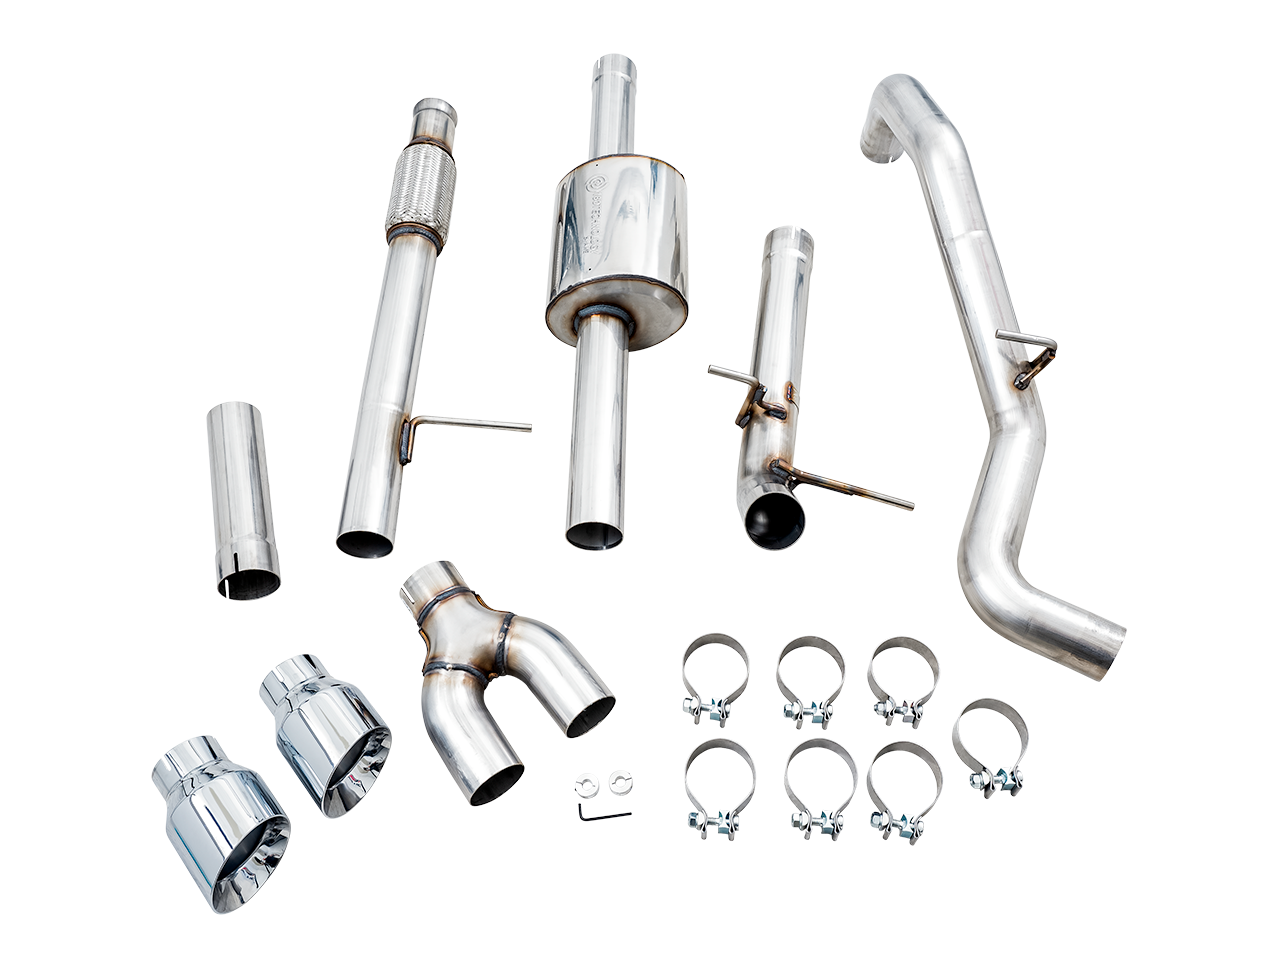 AWE 0FG Exhaust Suite for the 4th Gen Silverado/Sierra 5.3L - AWE